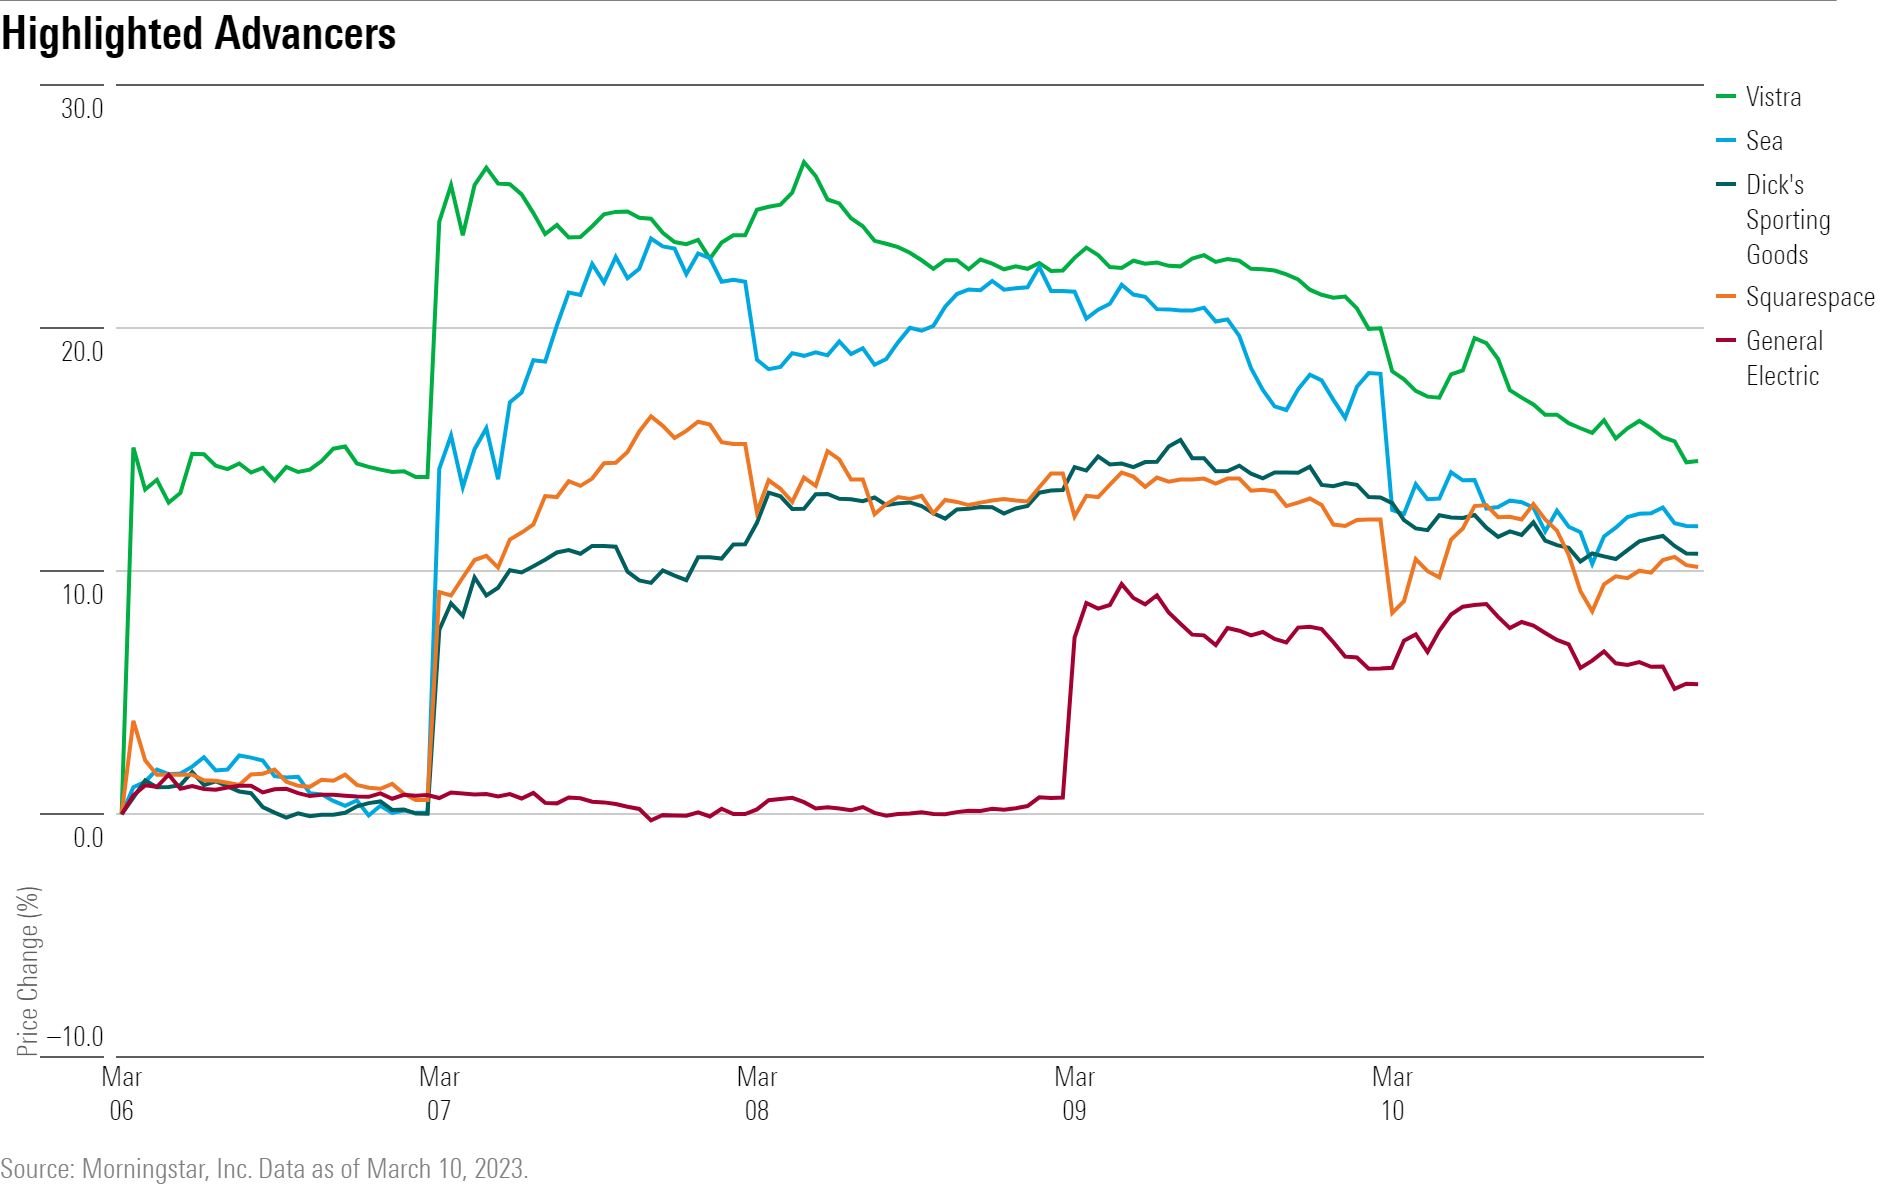 A line chart showing the performance of VST, SE, DKS, SQSP, and GE stocks.